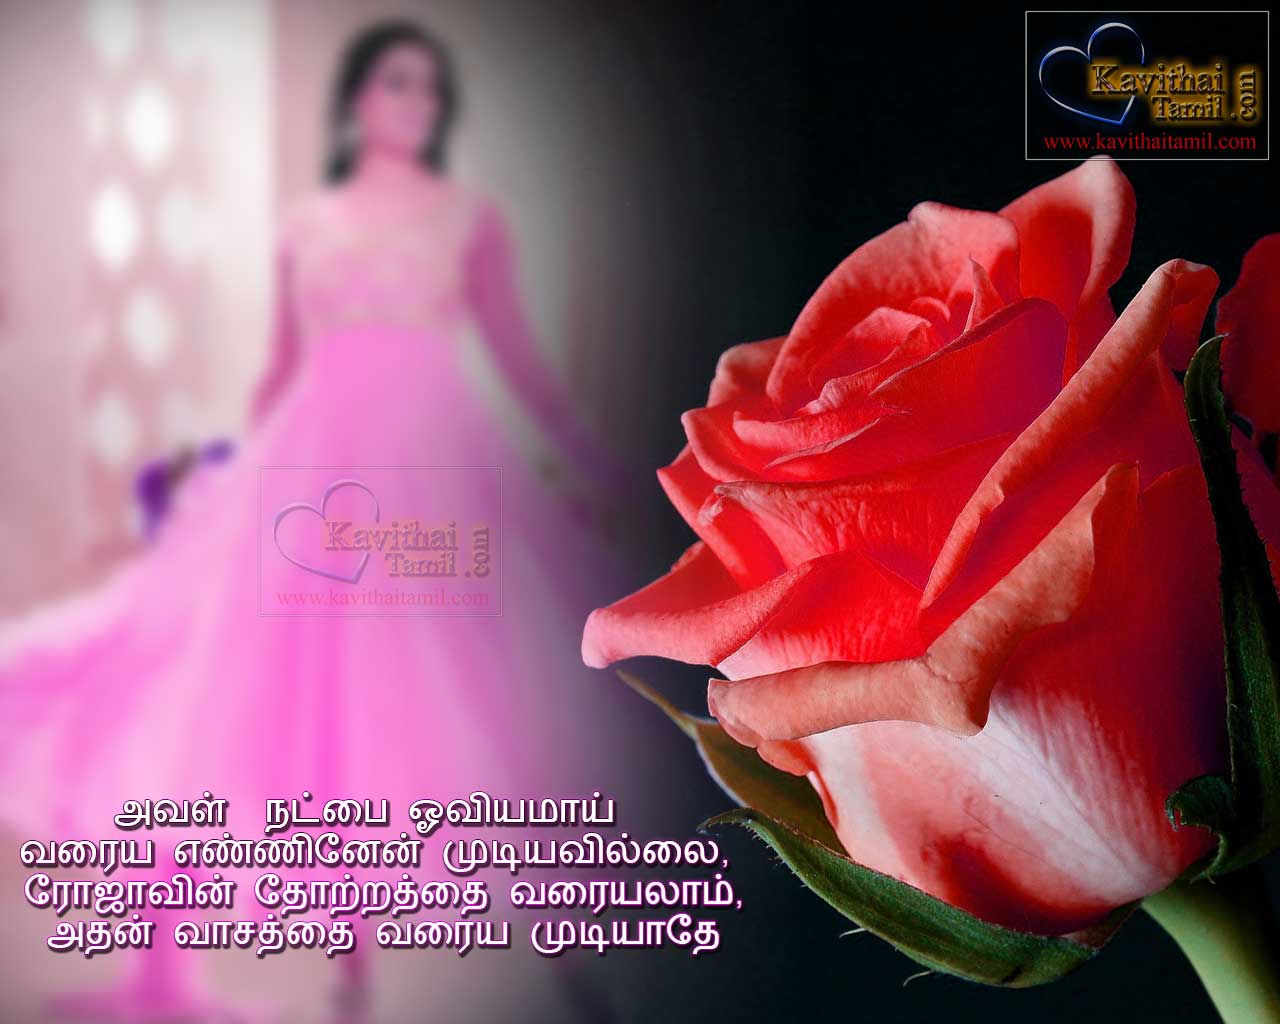 Friendship Forever Quotes In Tamil Long Distance Friendship Girls Tamil Natpu Kavithaigal With Rose